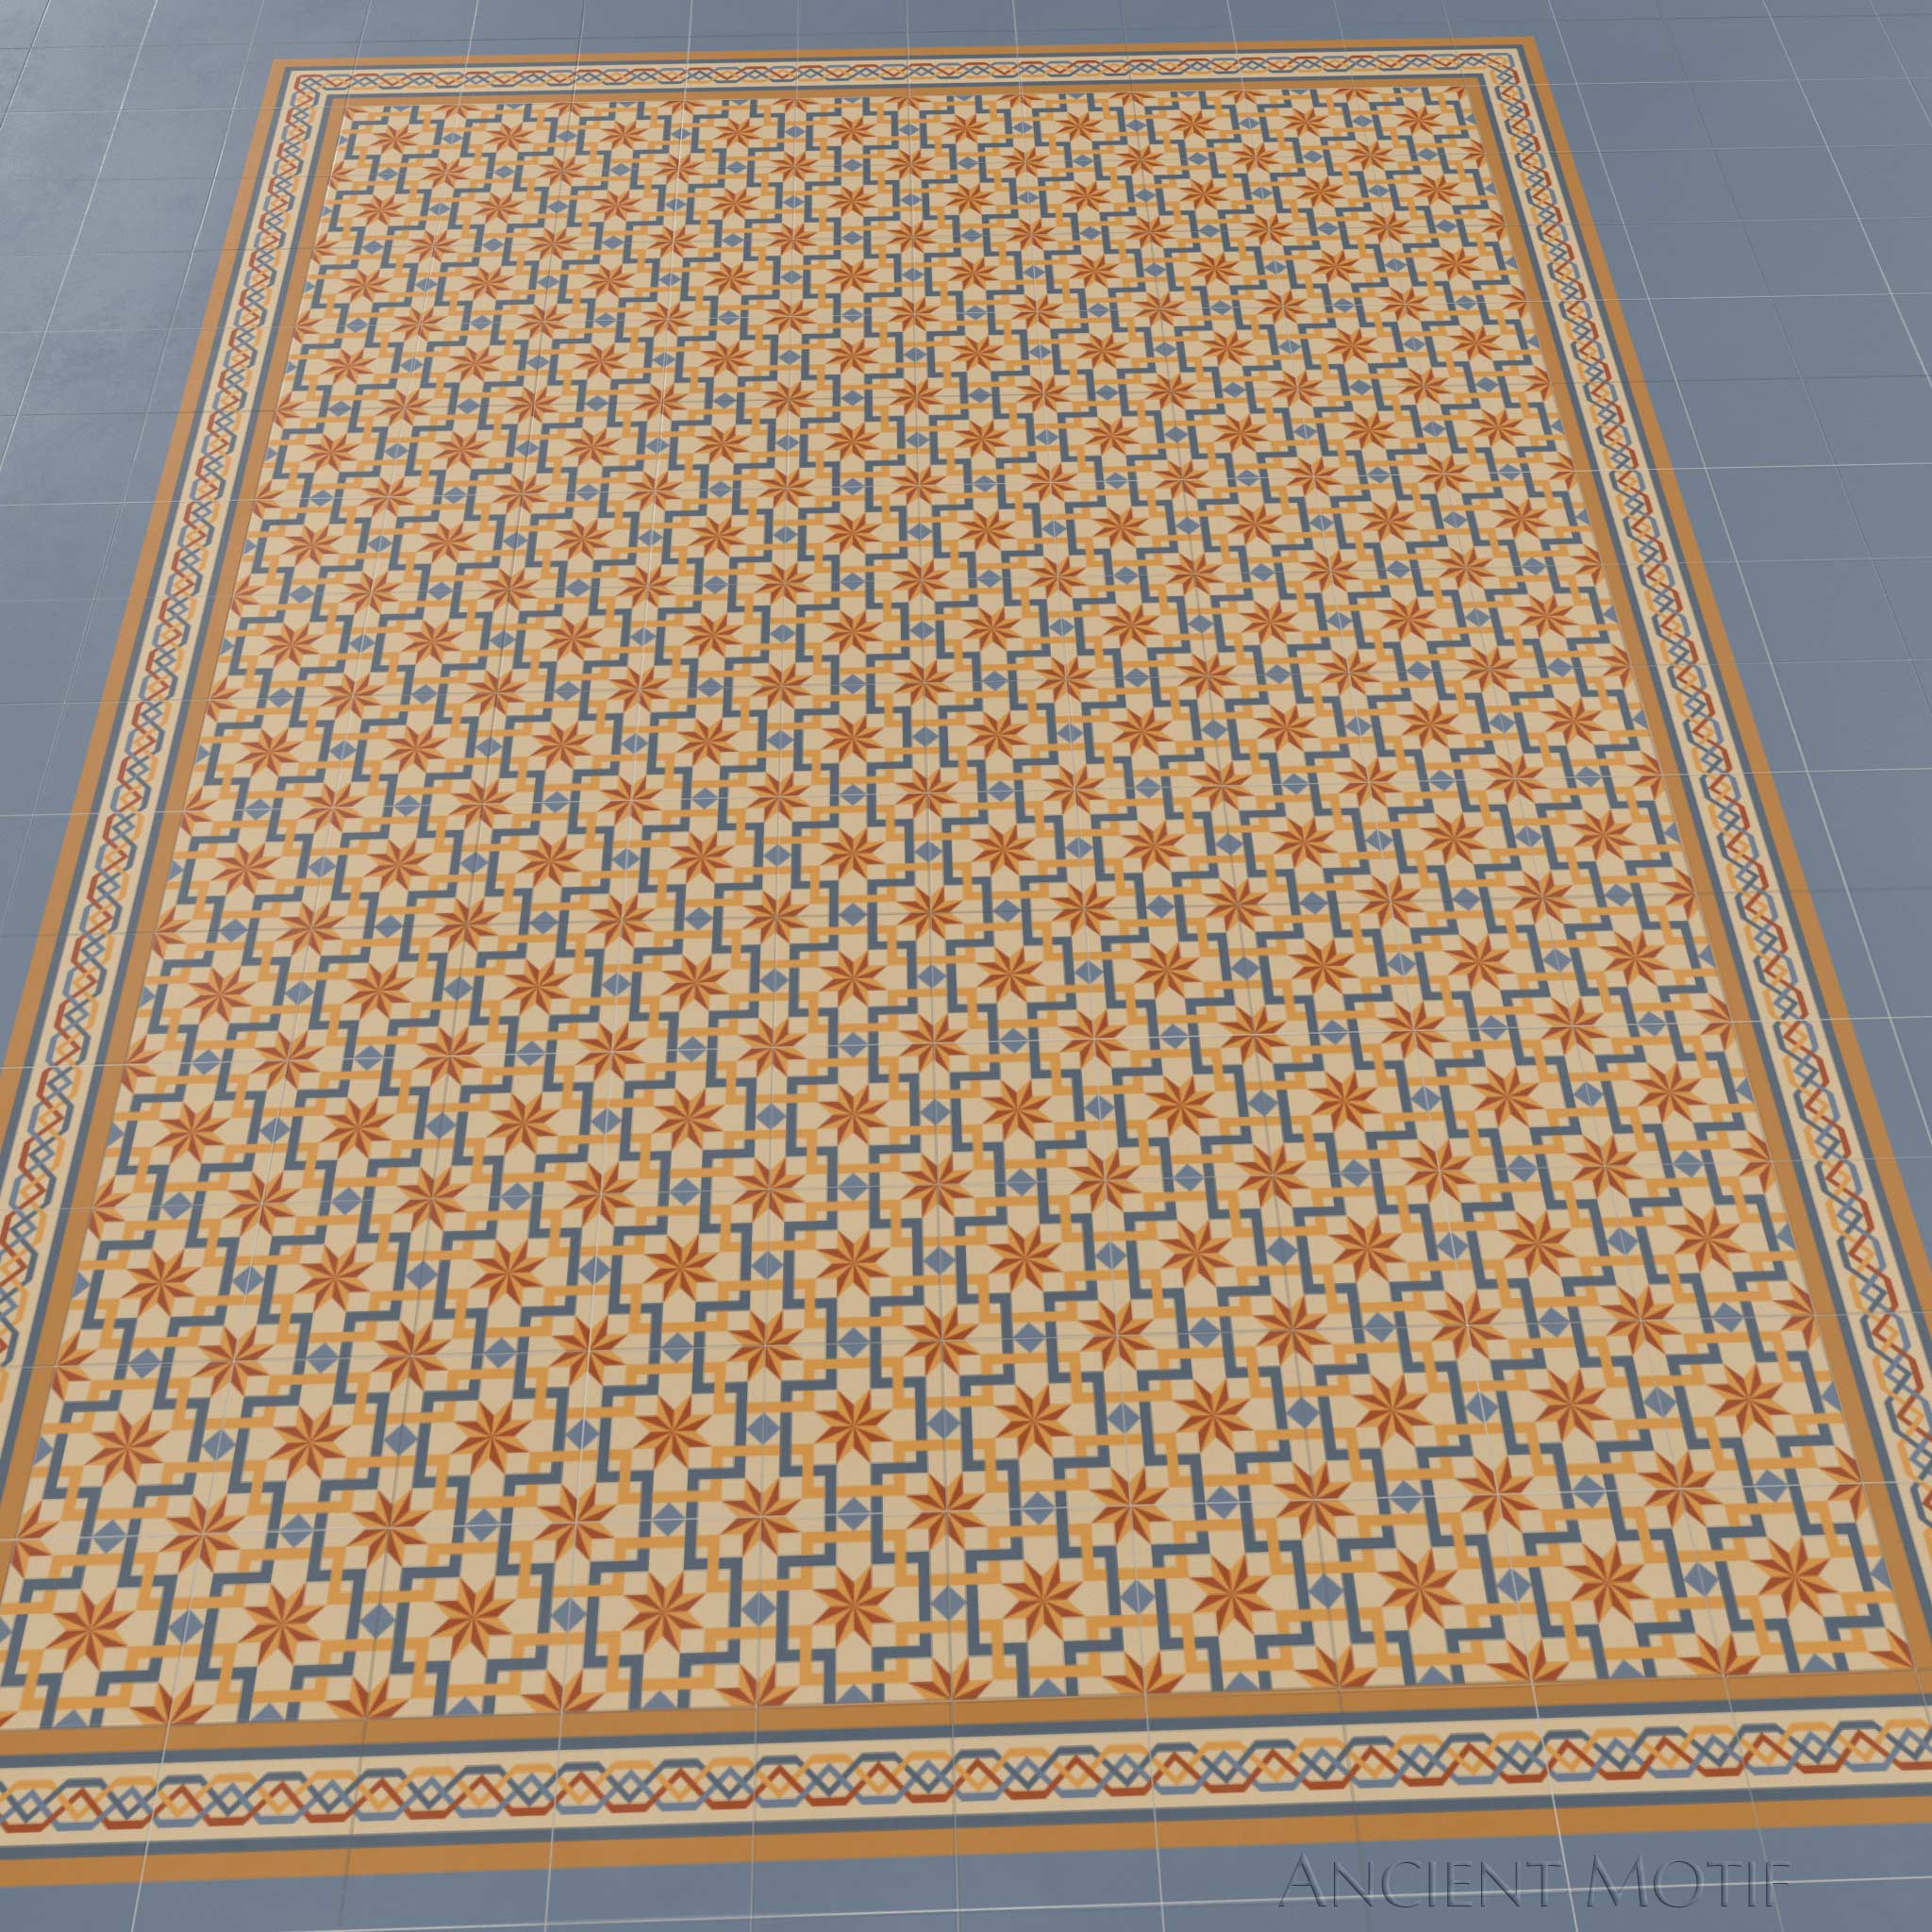 Andalusia Encaustic Cement Tile Floor in Cornflower, Ginger and Apricot